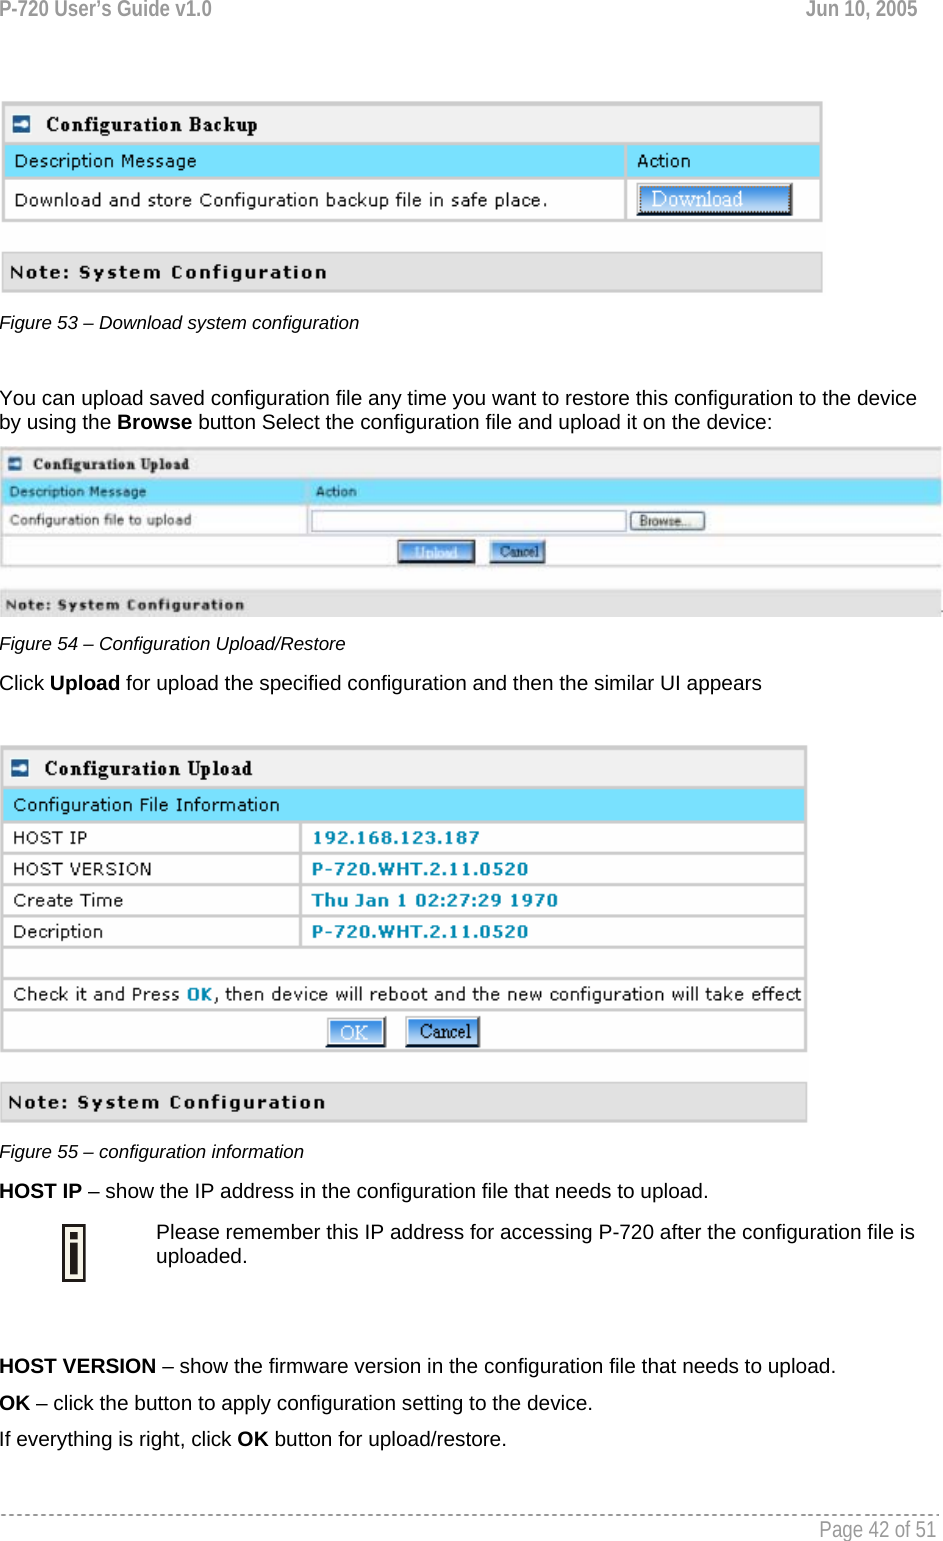 P-720 User’s Guide v1.0  Jun 10, 2005     Page 42 of 51     Figure 53 – Download system configuration  You can upload saved configuration file any time you want to restore this configuration to the device by using the Browse button Select the configuration file and upload it on the device:  Figure 54 – Configuration Upload/Restore Click Upload for upload the specified configuration and then the similar UI appears   Figure 55 – configuration information HOST IP – show the IP address in the configuration file that needs to upload.  Please remember this IP address for accessing P-720 after the configuration file is uploaded.  HOST VERSION – show the firmware version in the configuration file that needs to upload. OK – click the button to apply configuration setting to the device. If everything is right, click OK button for upload/restore.   